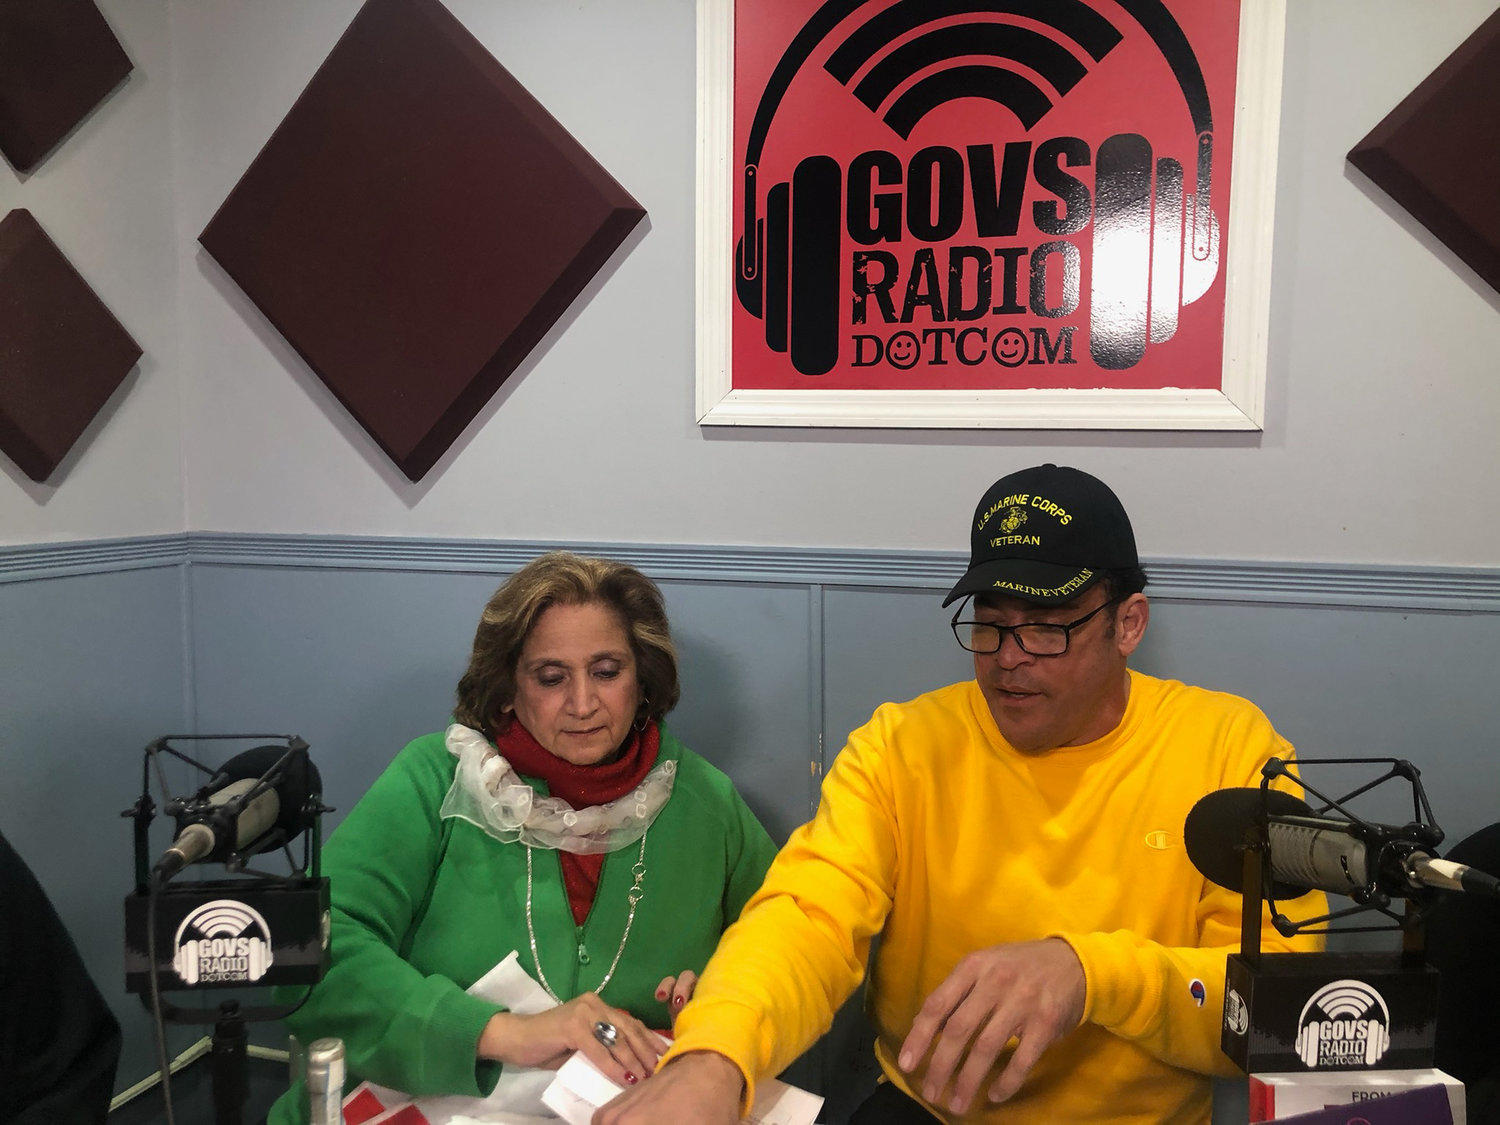 Long Island Breakfast Club Show co-hosts Valentina Janek and Gregg Cajuste air their talk show every Monday and Thursday.